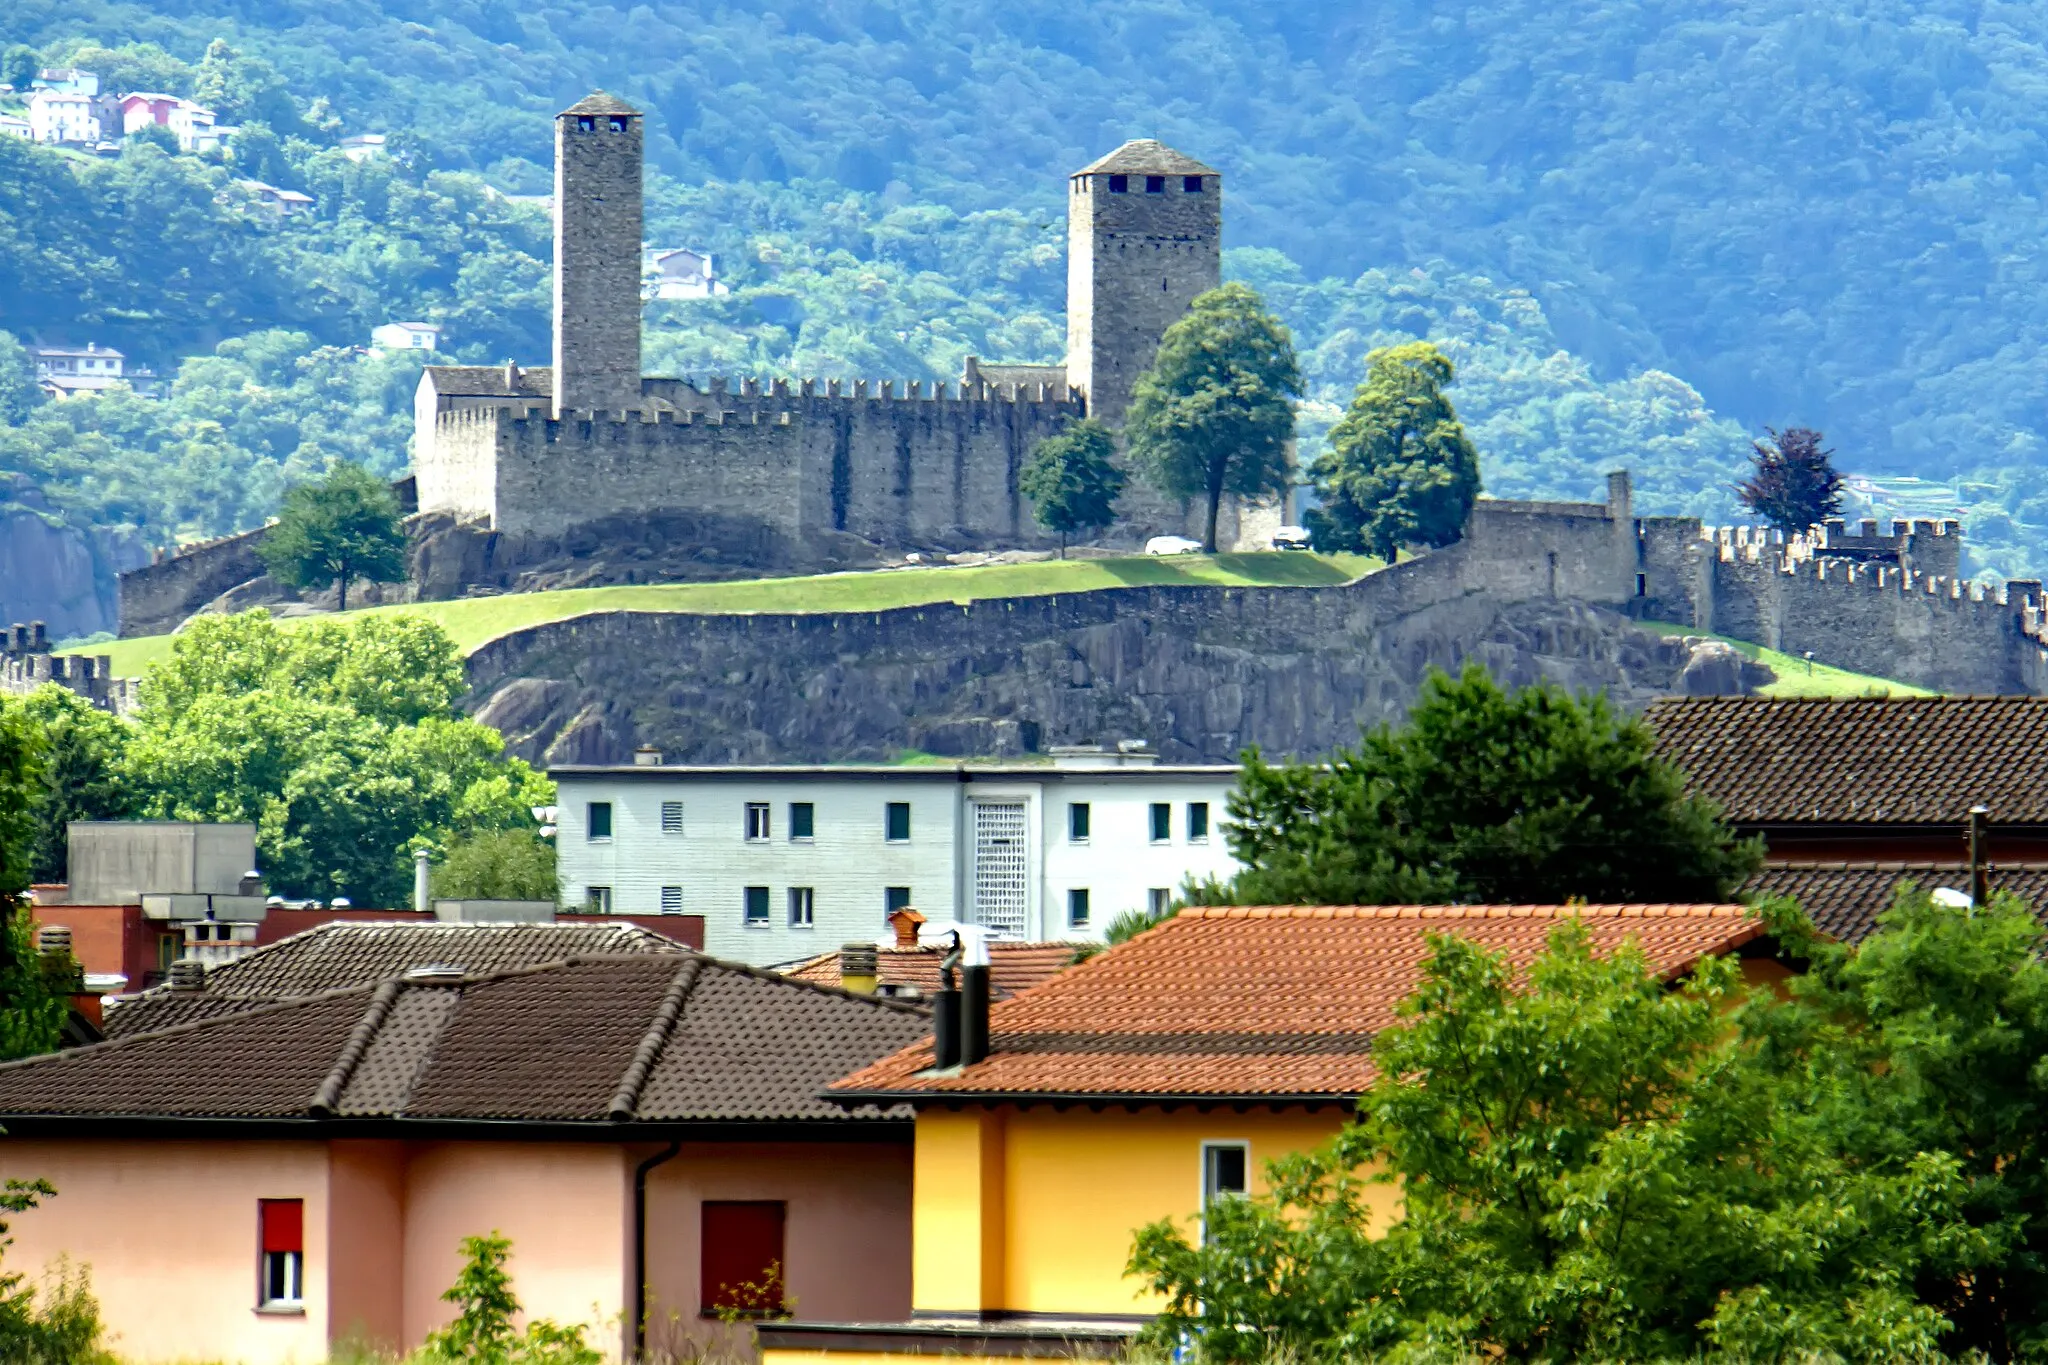 Photo showing: PLEASE, NO invitations or self promotions, THEY WILL BE DELETED. My photos are FREE to use, just give me credit and it would be nice if you let me know, thanks.
Castelgrande was fortified since at least the late 1st century BC and until the 13th century it was the only fortification in Bellinzona. During its history the castle has been known as the stronghold (before the 13th century), the Old Castle in the 14–15th centuries, Un Castle after 1506 and Saint Michael's Castle from 1818.